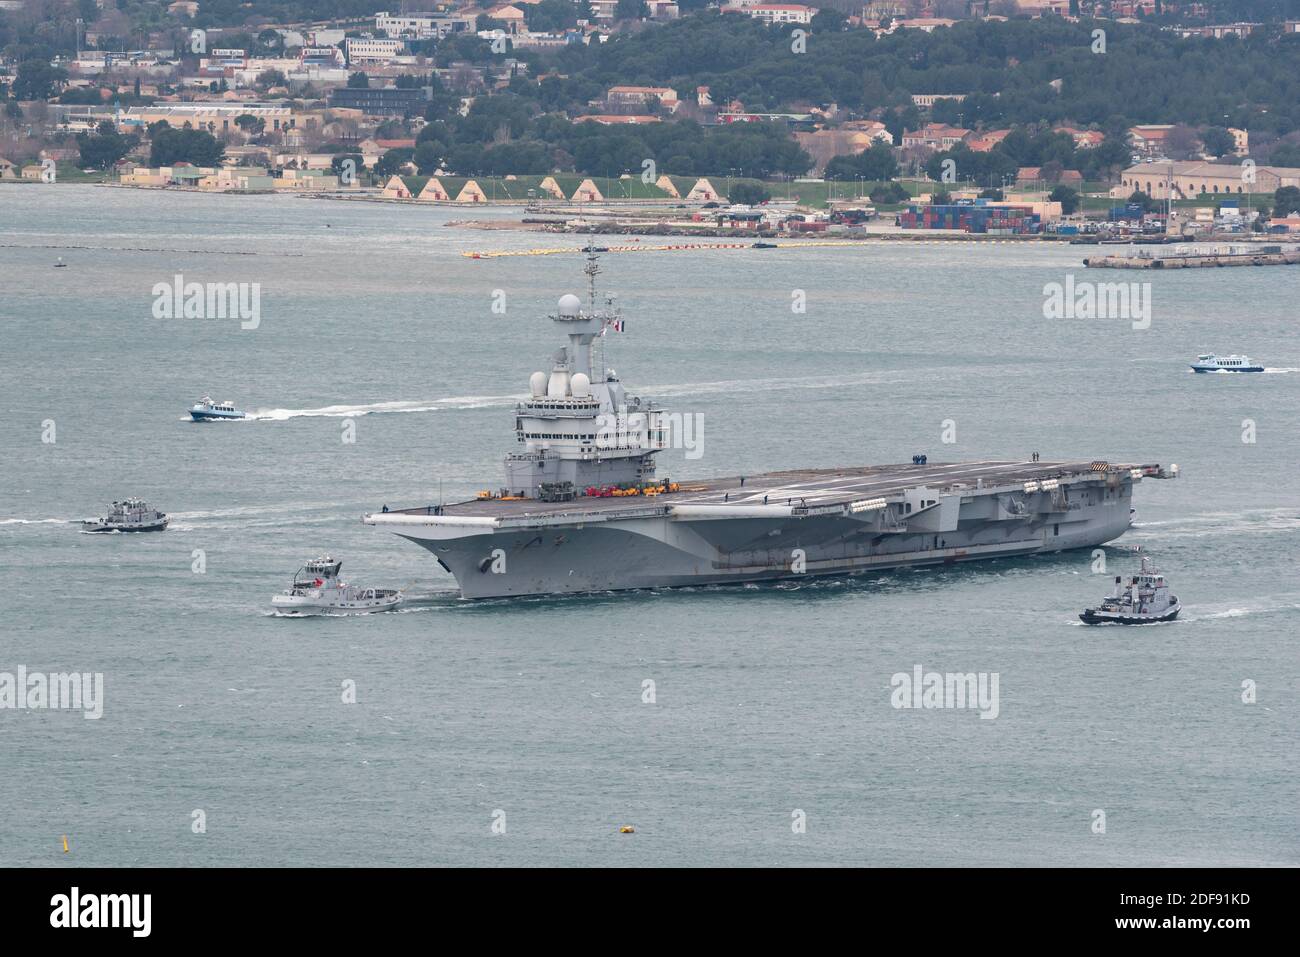 Hand out file photo dated January 21, 2020 of French nuclear aircraft carrier sets sail from Toulon naval base for a several months mission to the eastern Mediterranean to fight terrorism. France’s flagship military aircraft carrier the Charles de Gaulle is on its way back to port after some staff on board showed signs of Covid-19 symptoms, said the French armed forces ministry on Wednesday. The ministry said around 40 staff were under strict medical observation at present. The disclosure comes after a coronavirus outbreak hit the US aircraft carrier Theodore Roosevelt, now at port in Guam. Ph Stock Photo